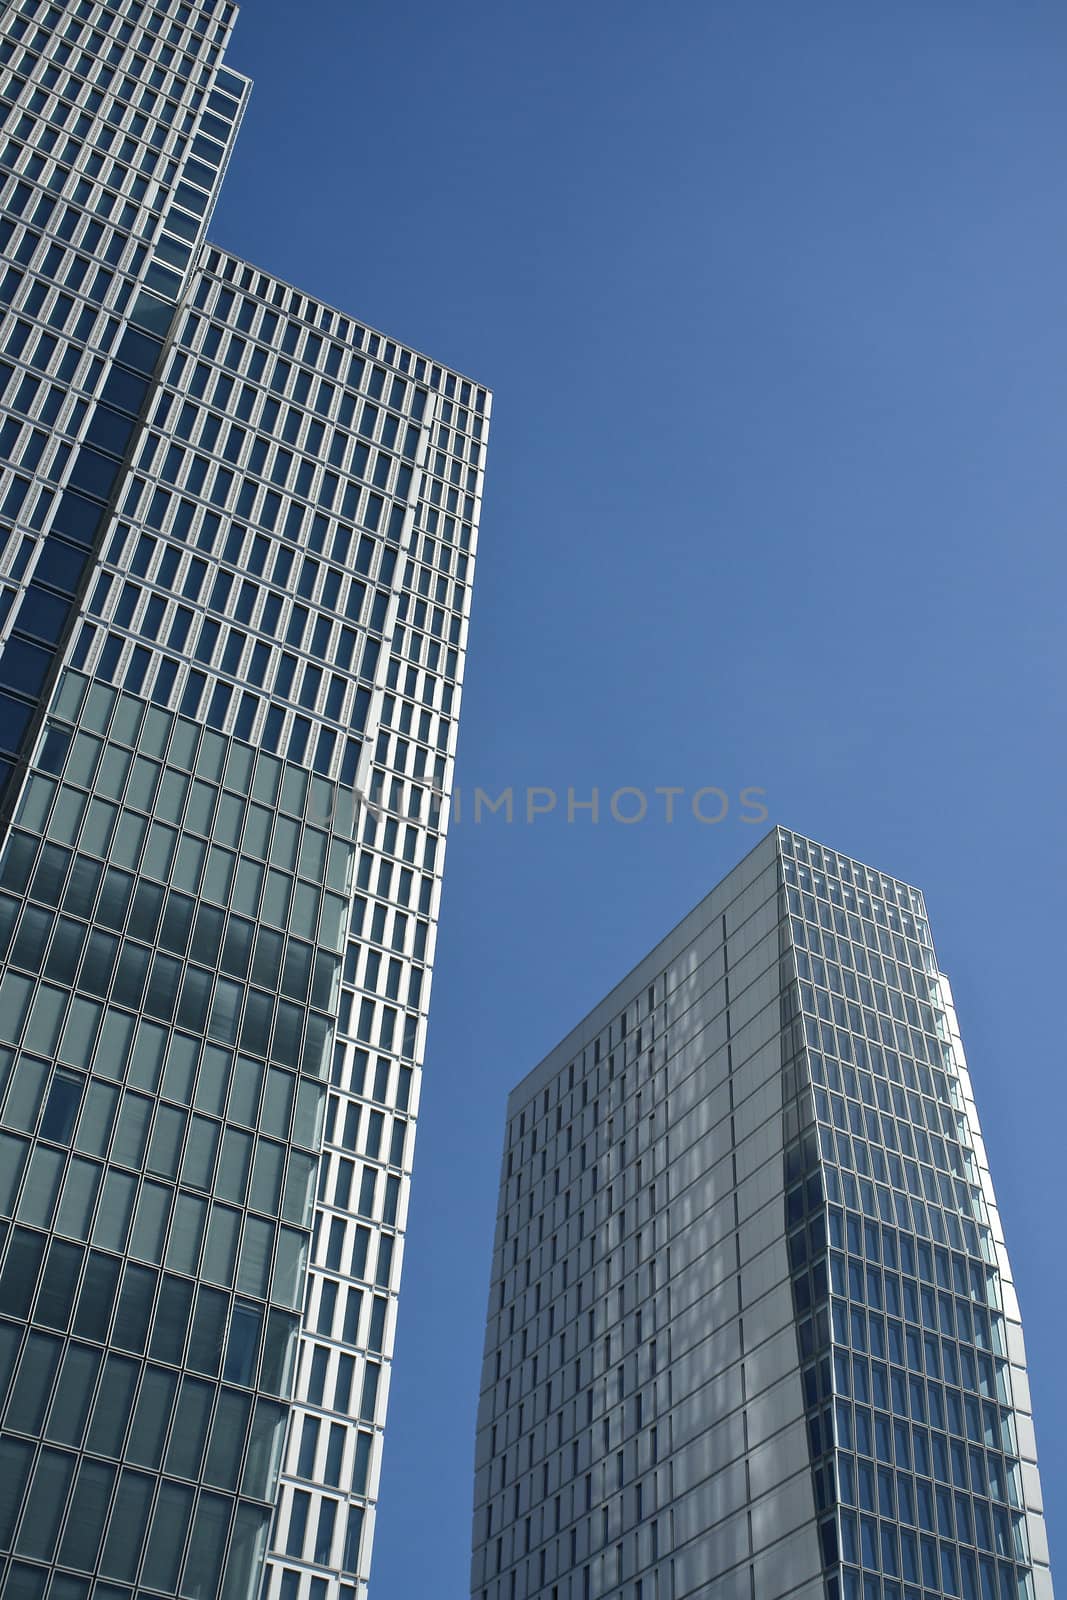 Street view of contemporary office buildings in Frankfurt.